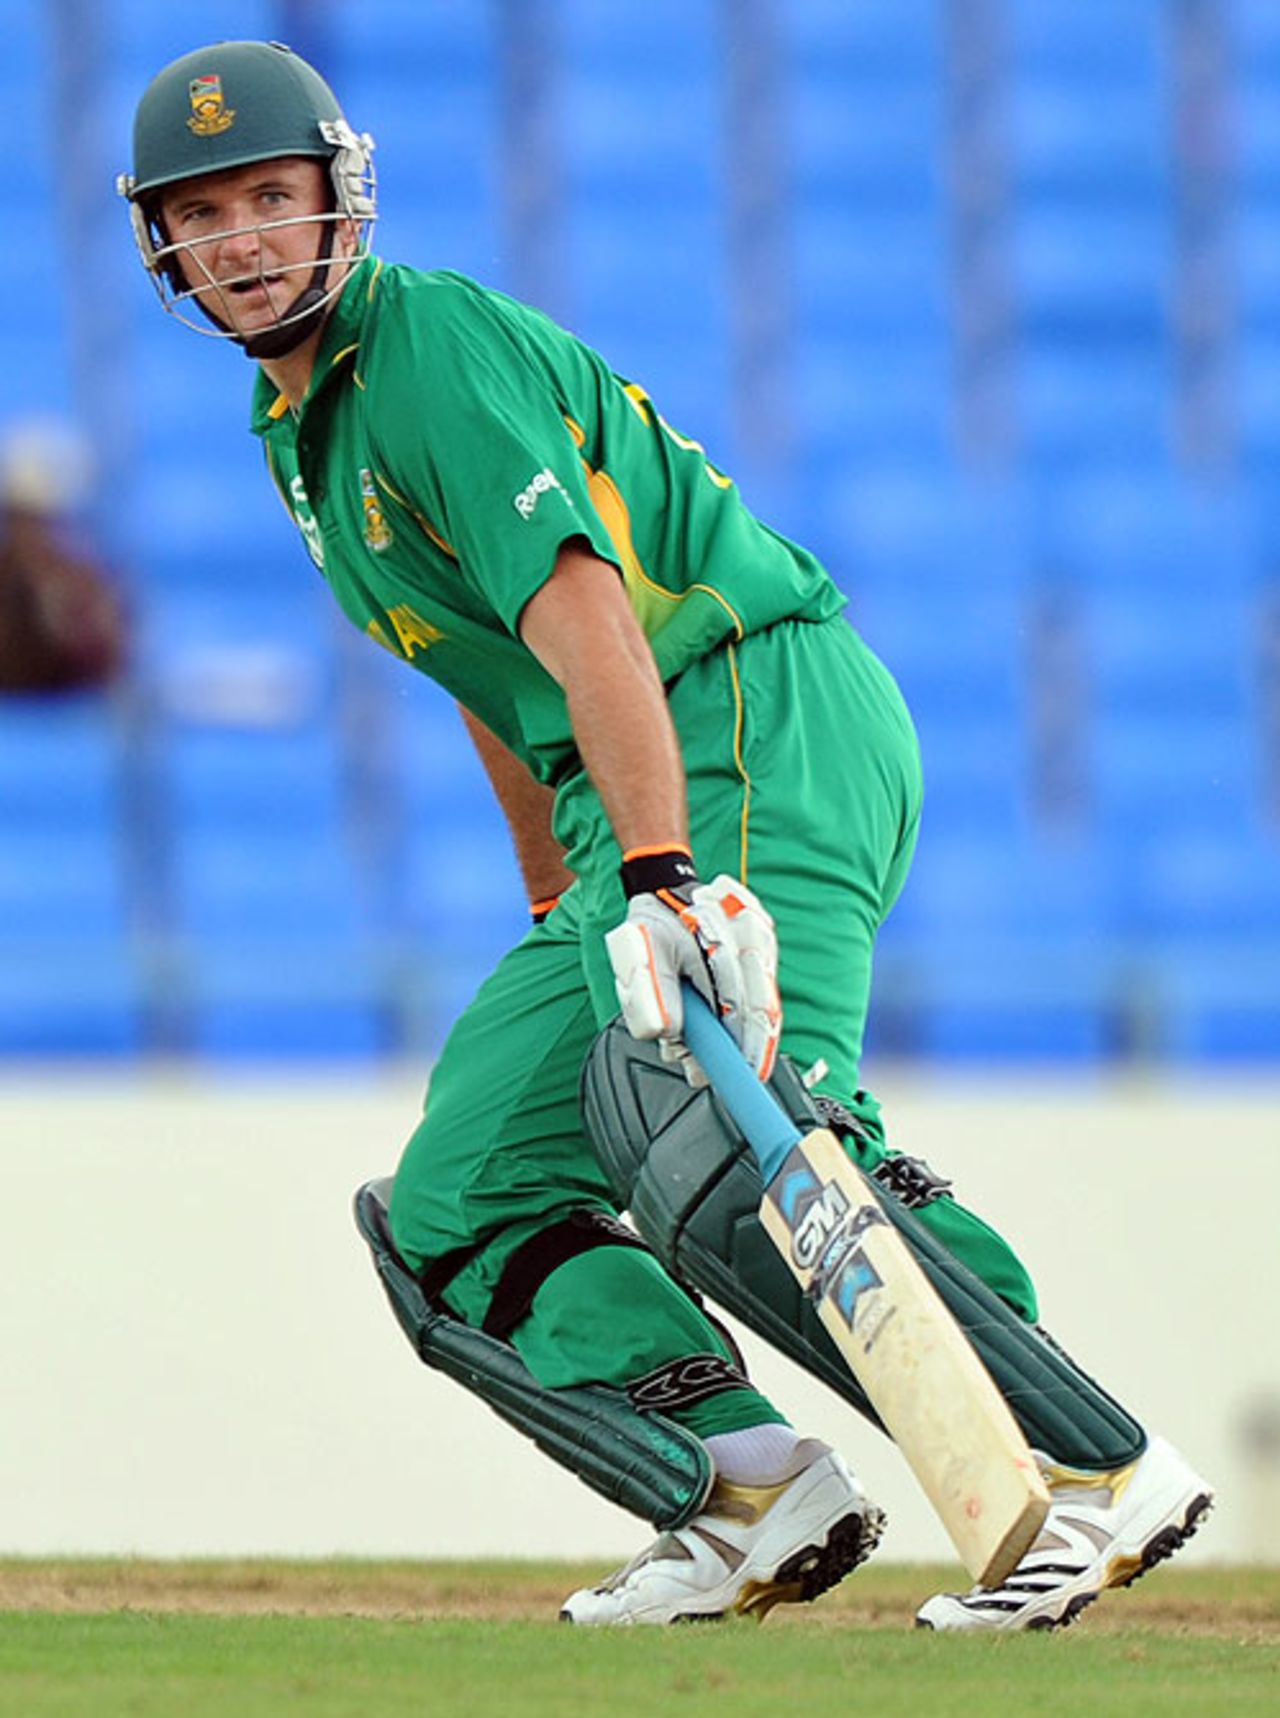 Graeme Smith made 18 from 17 balls before falling to Dwayne Bravo, West Indies v South Africa, 1st ODI, Antigua, May 22, 2010